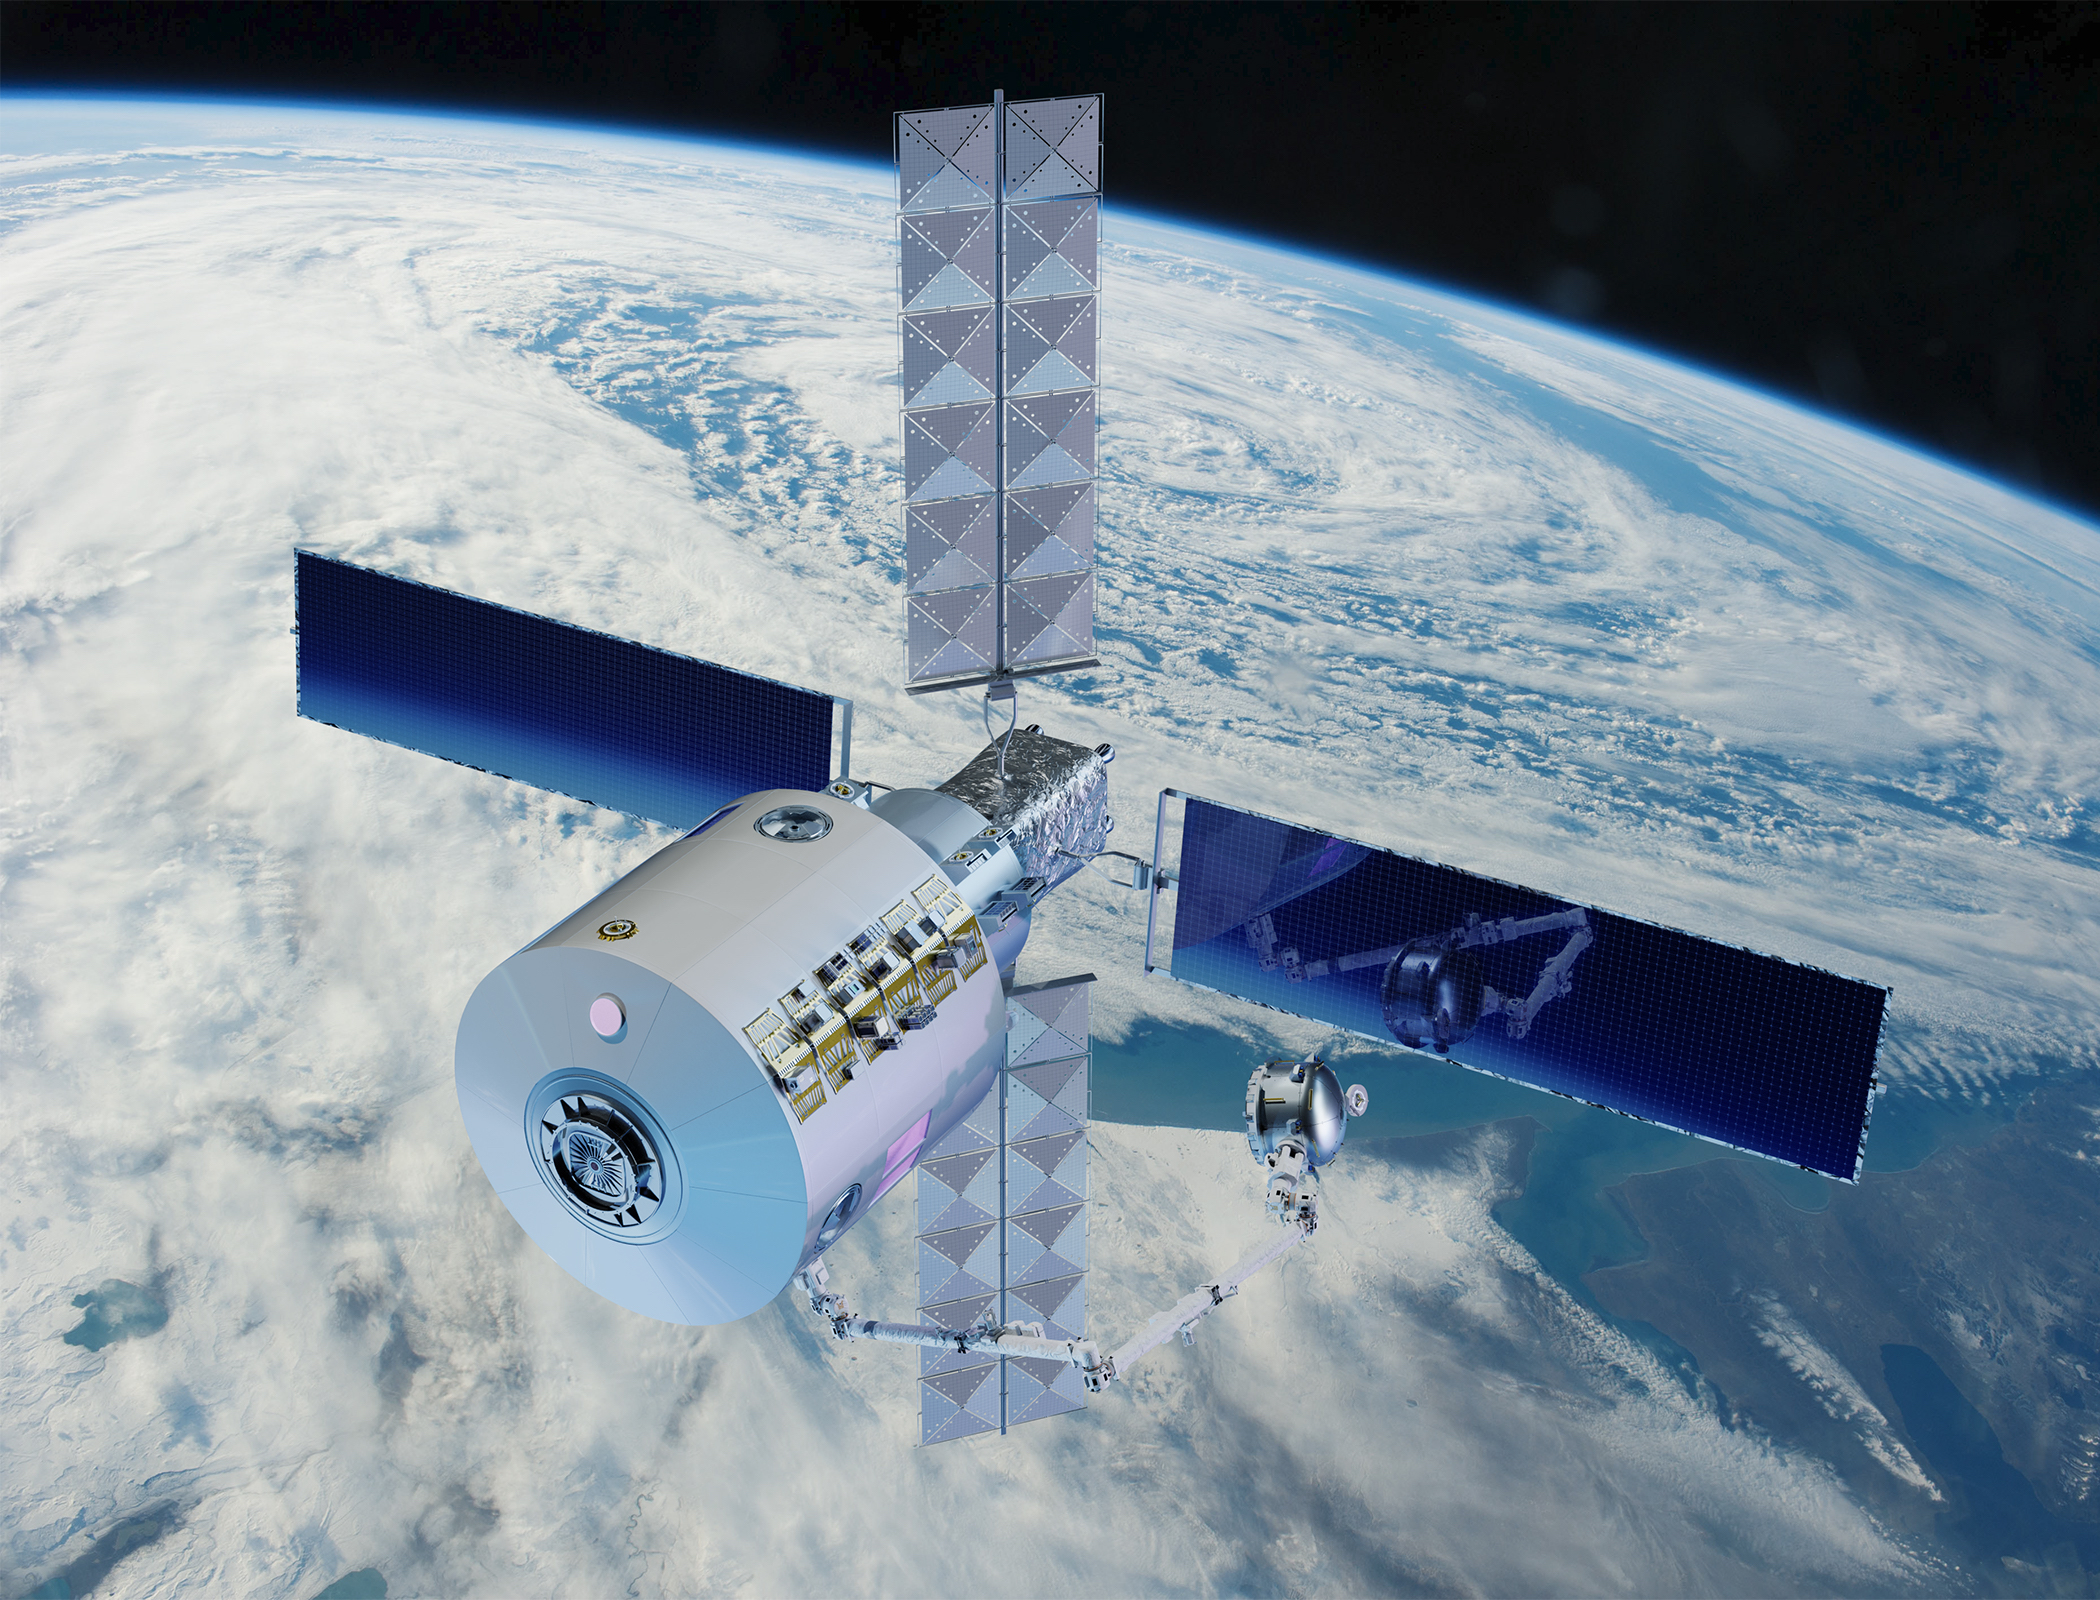 Commercial space station could succeed ISS